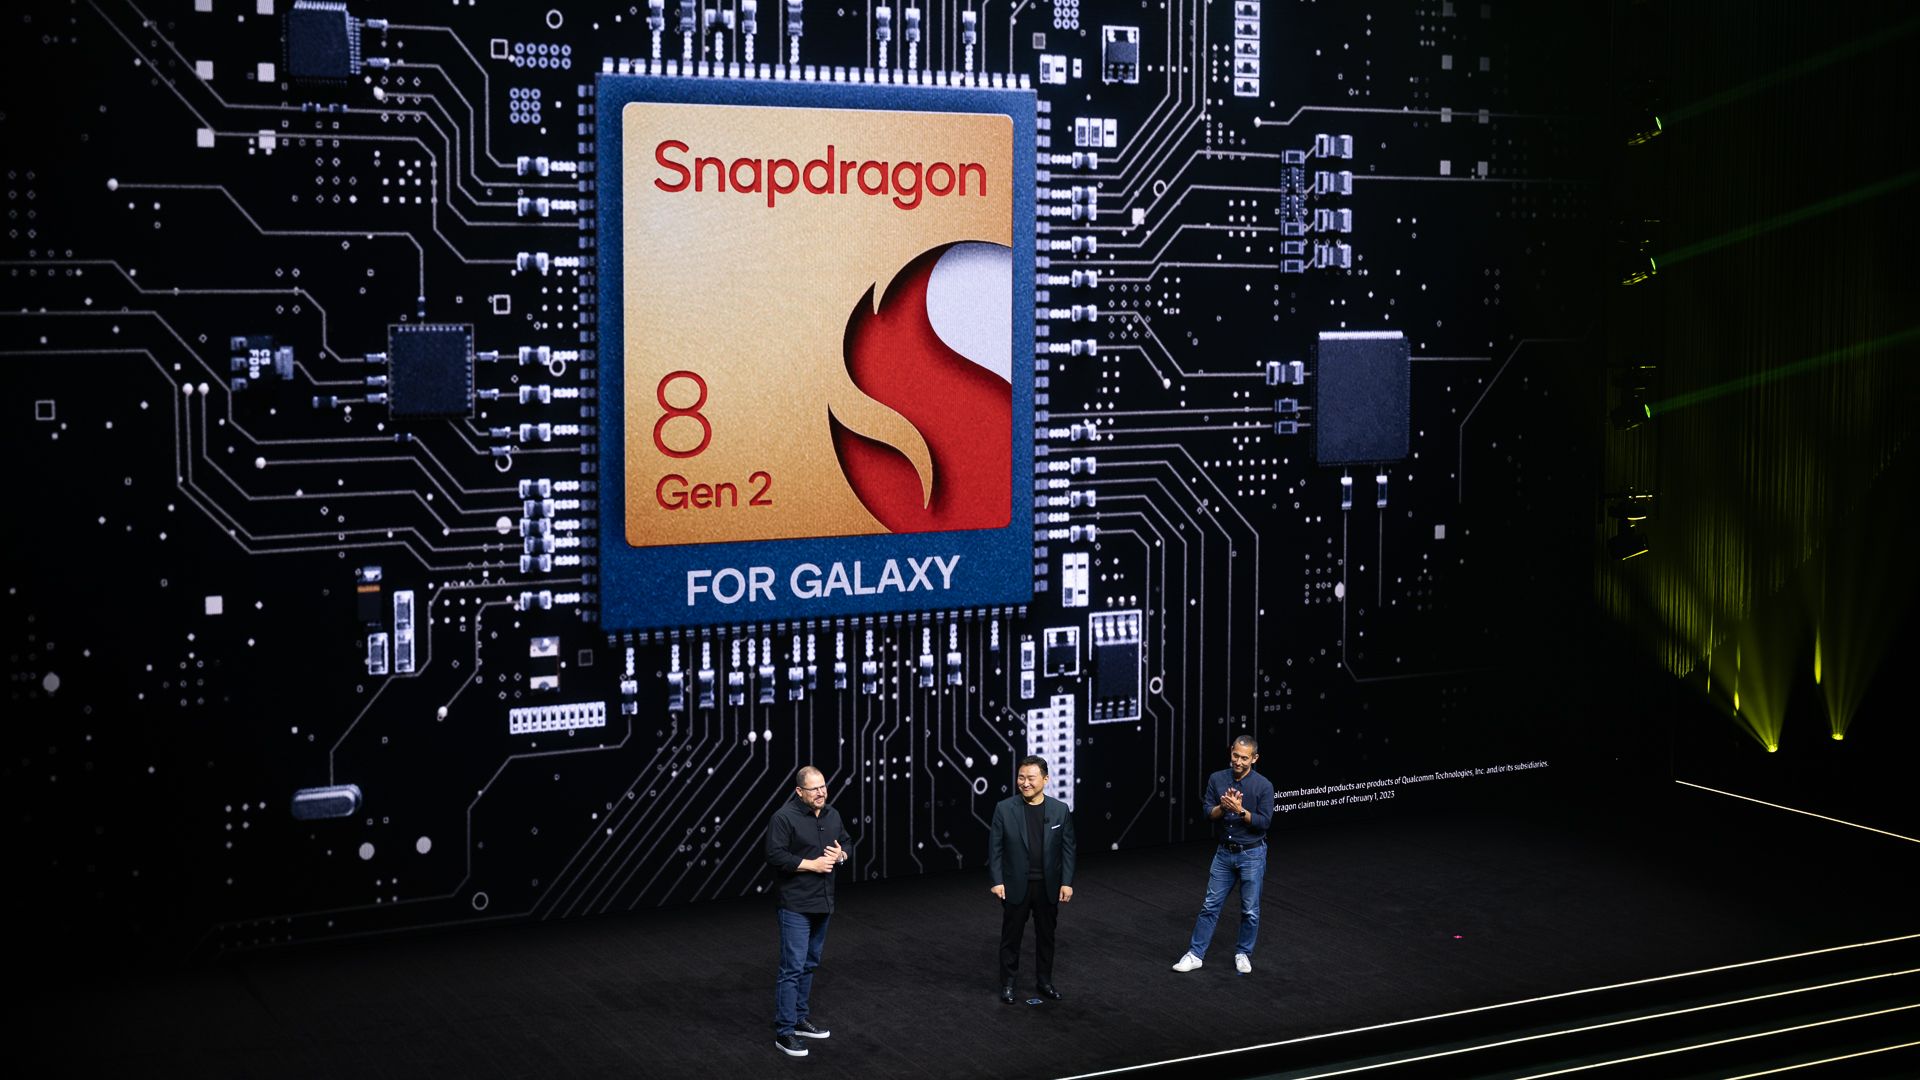 TM Roh, Cristiano Amon, and Hiroshi Lockheimer presenting at Galaxy Unpacked 2023 with the Snapdragon 8 Gen 2 for Galaxy icon on the screen